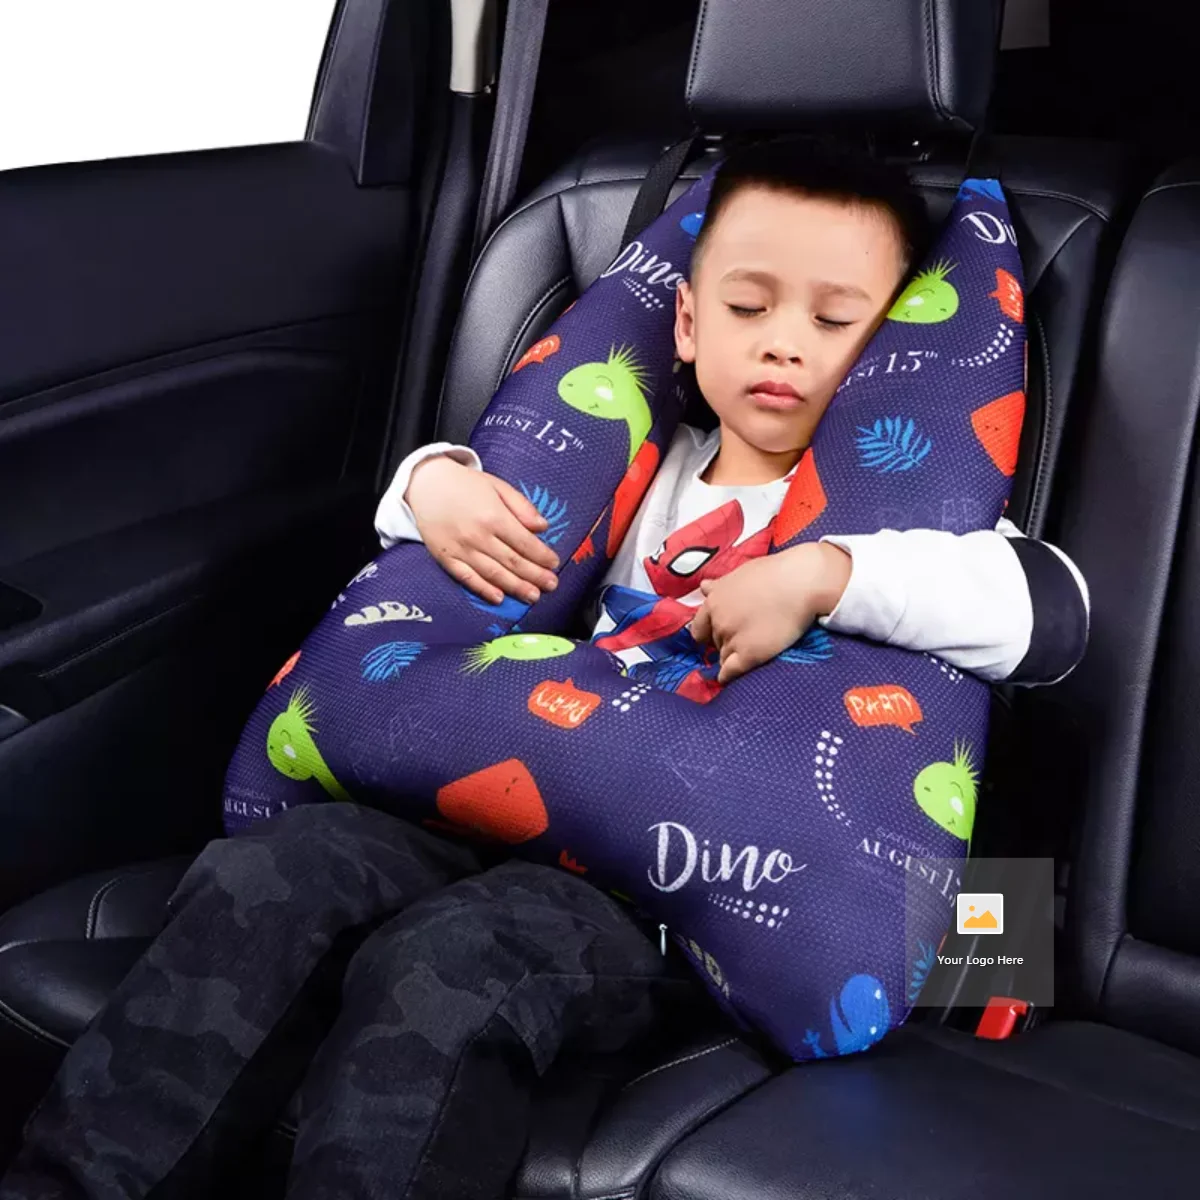 Safety Child Car Seat Belt Cover Car Sleep Pillow Shoulder Pads Cover Cushion@#